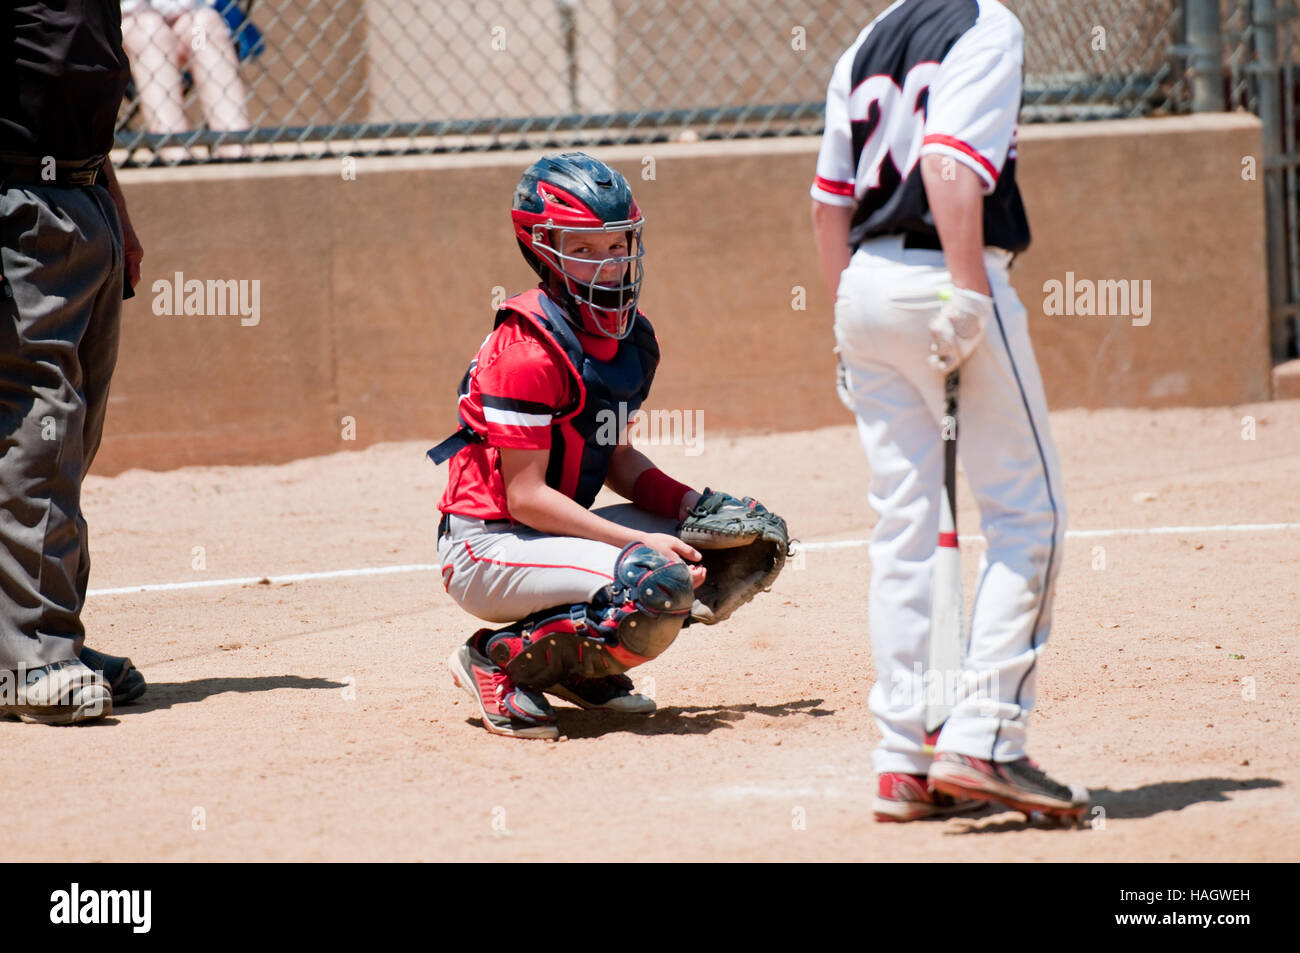 American youth baseball catcher looking at coach for signals with umpire behind him. Stock Photo